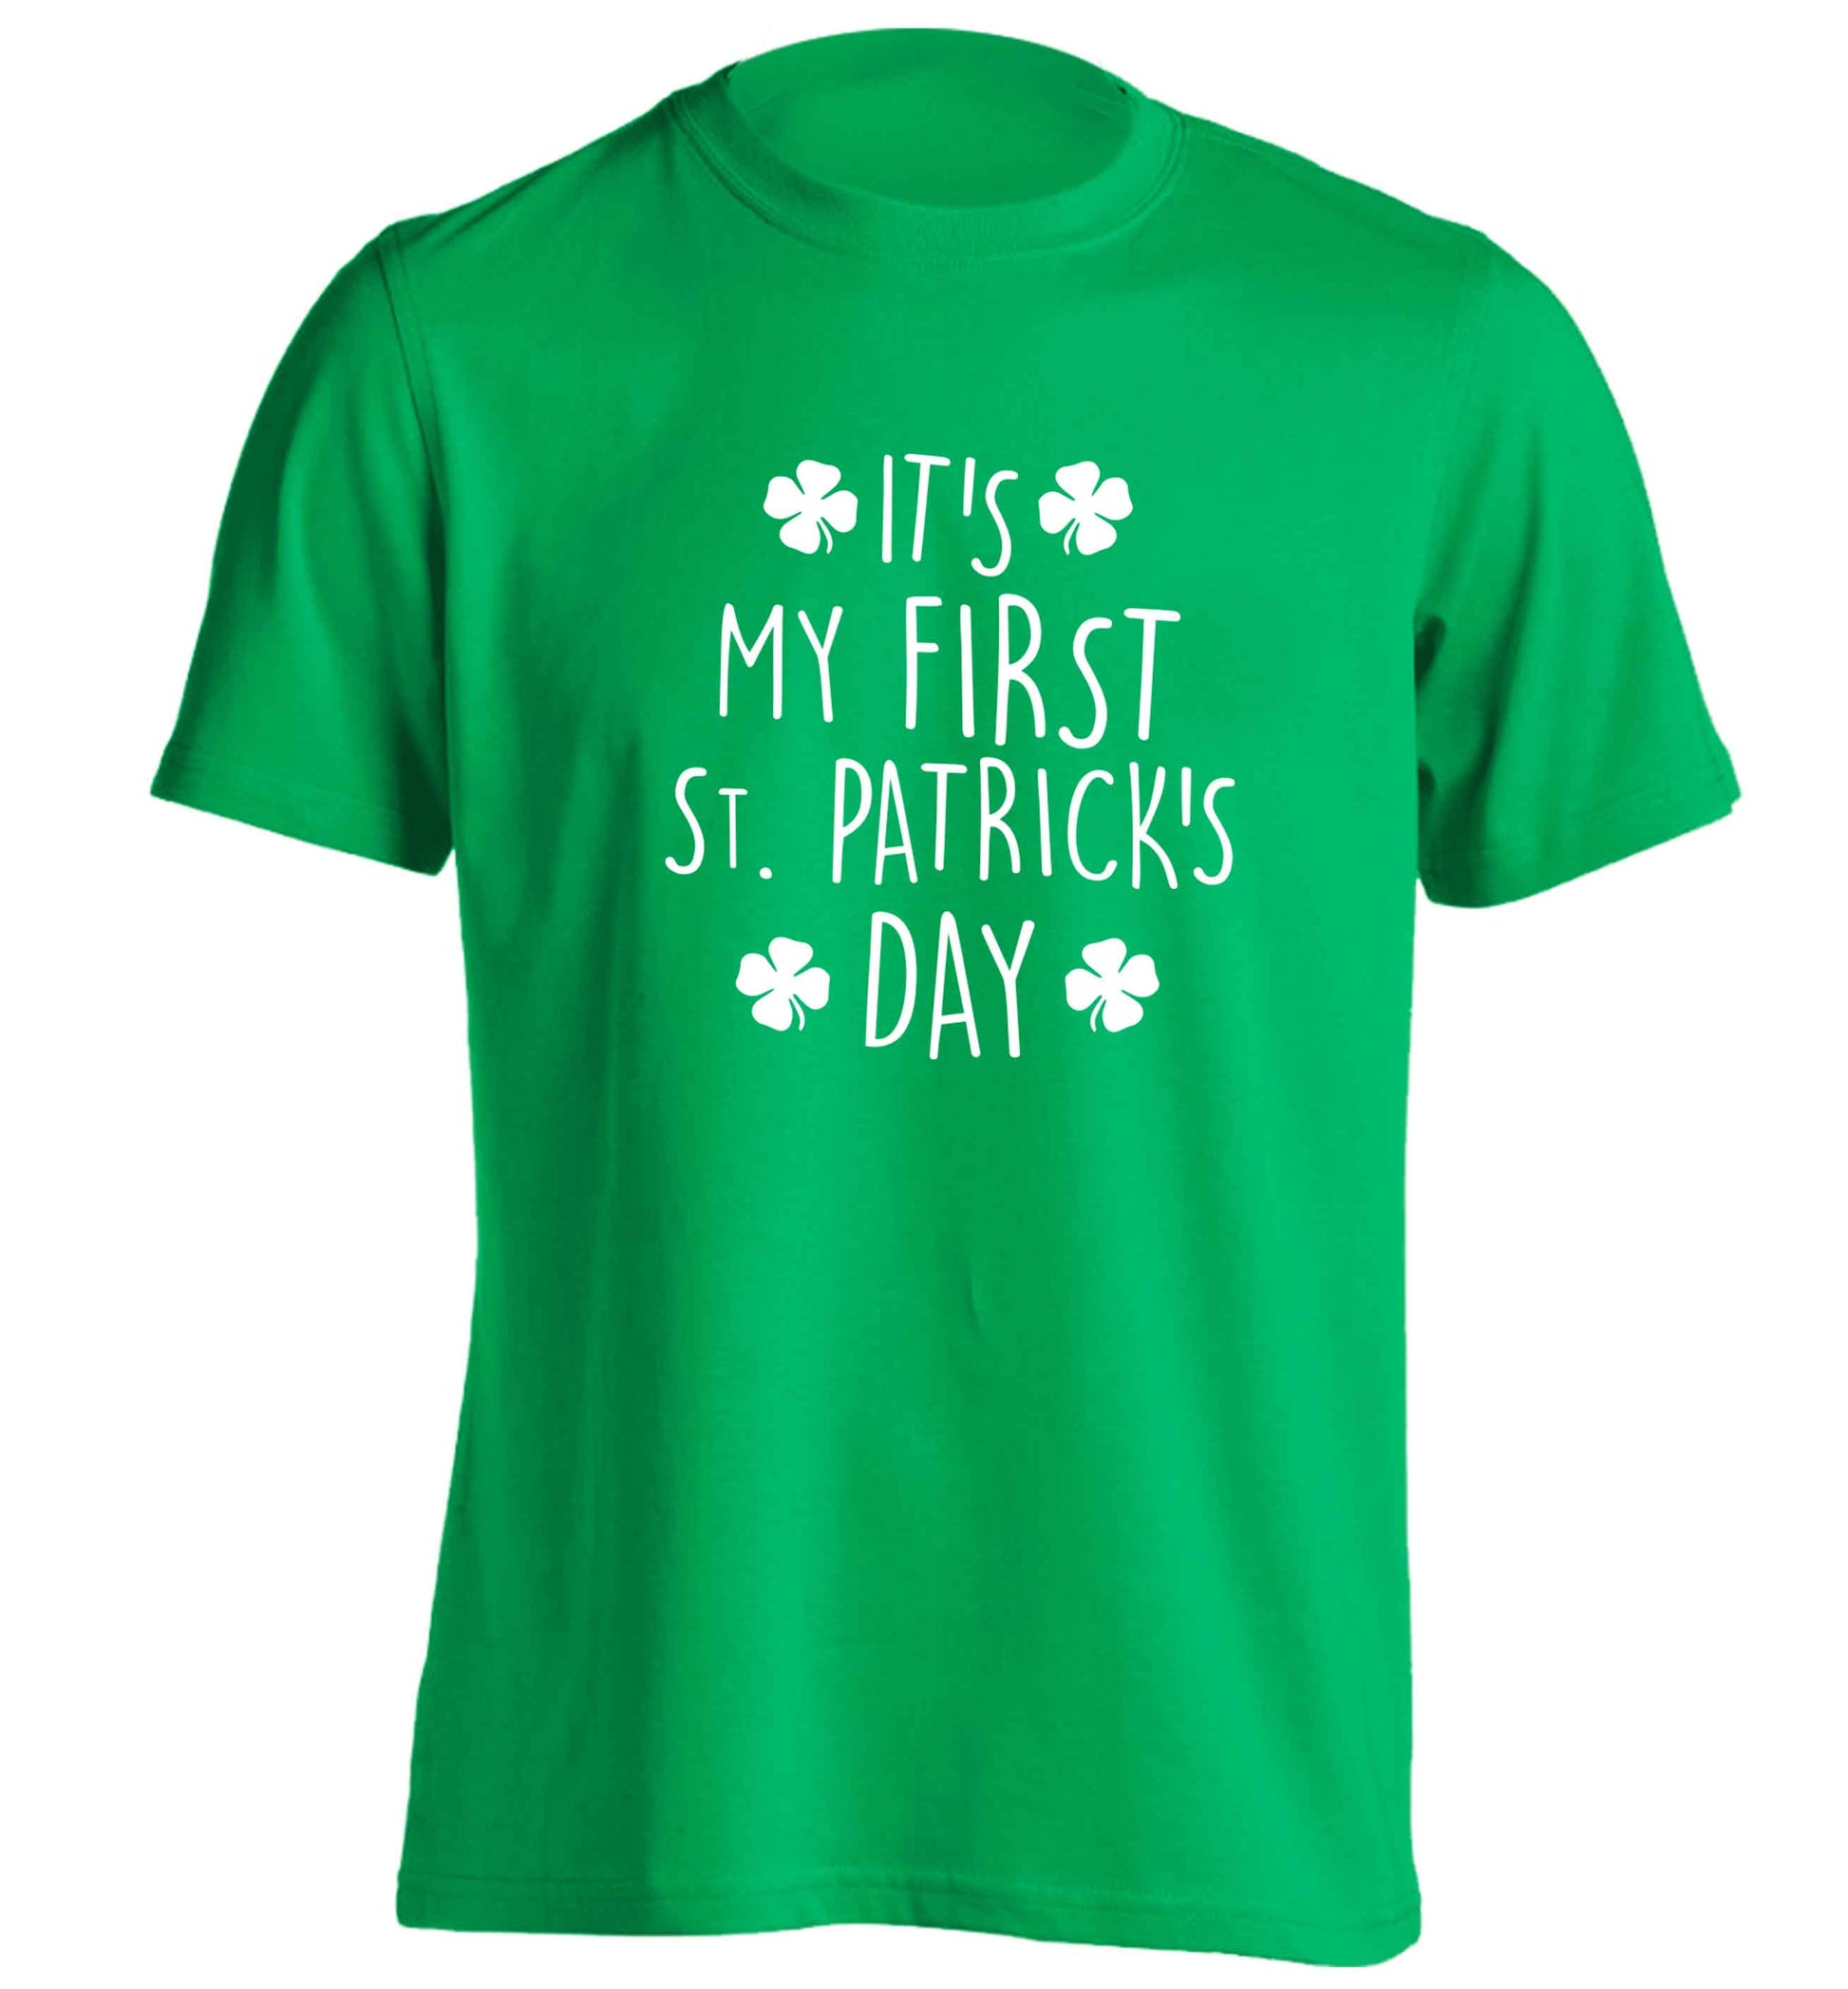 It's my first St.Patrick's day adults unisex green Tshirt 2XL